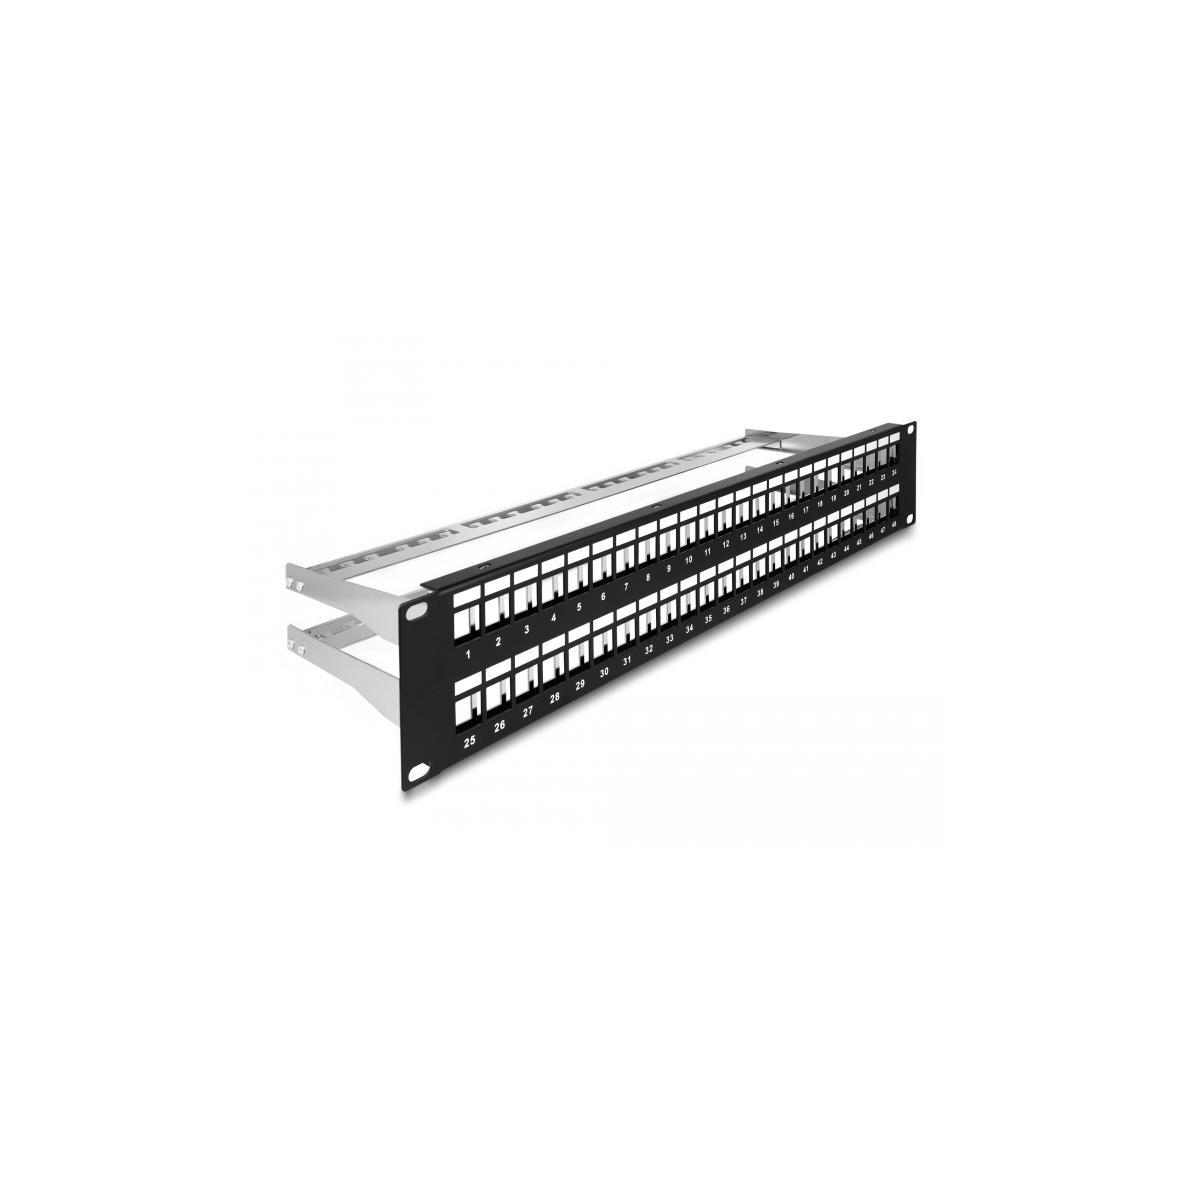 DELOCK 66878 Patchpanel